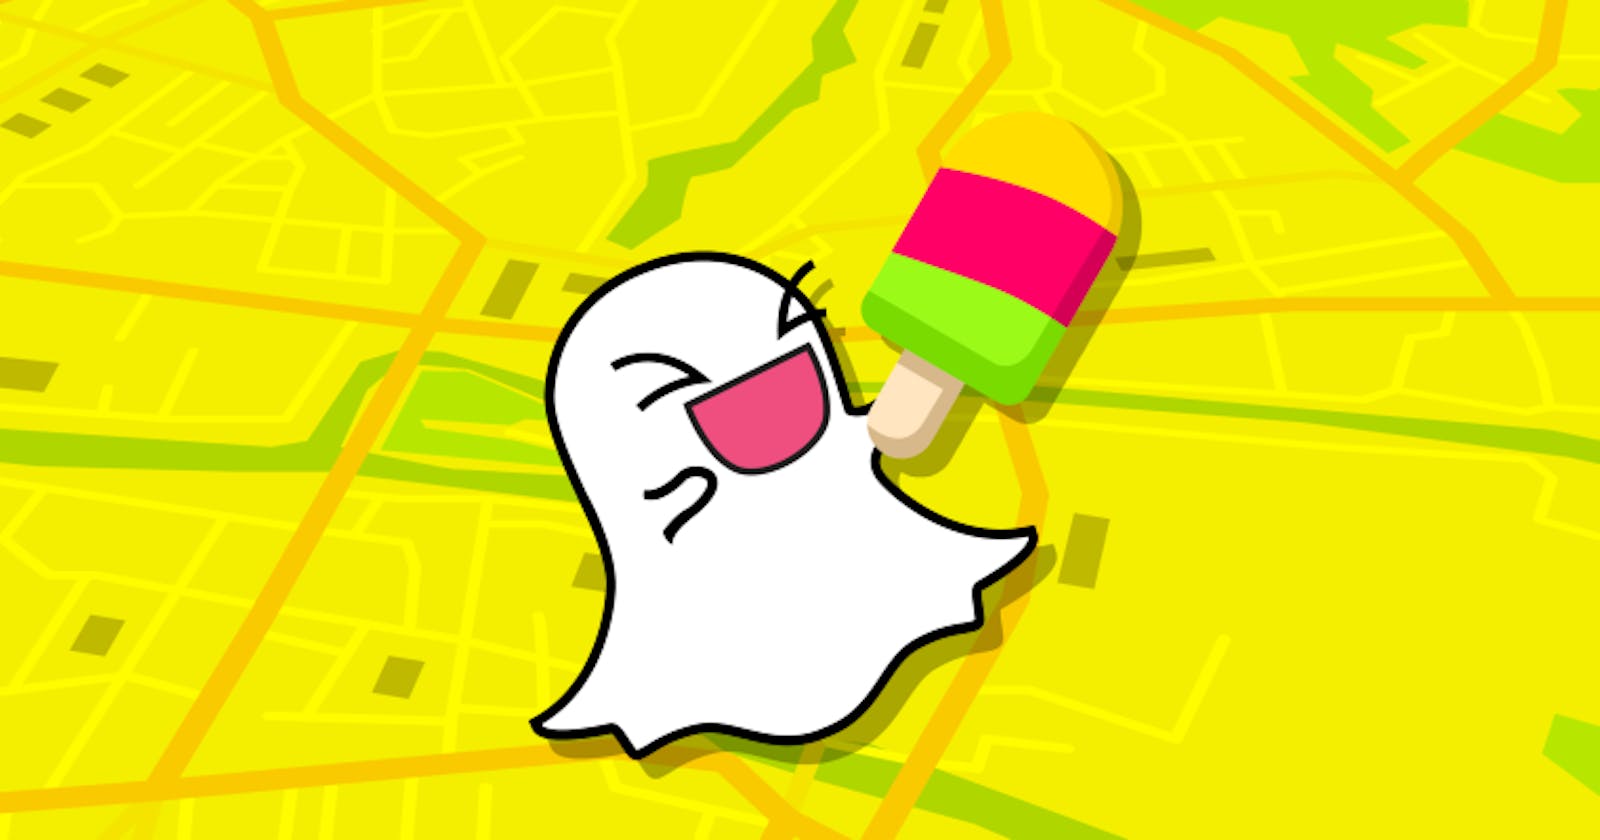 Snapchat acquires social map app Zenly for $250M to $350M